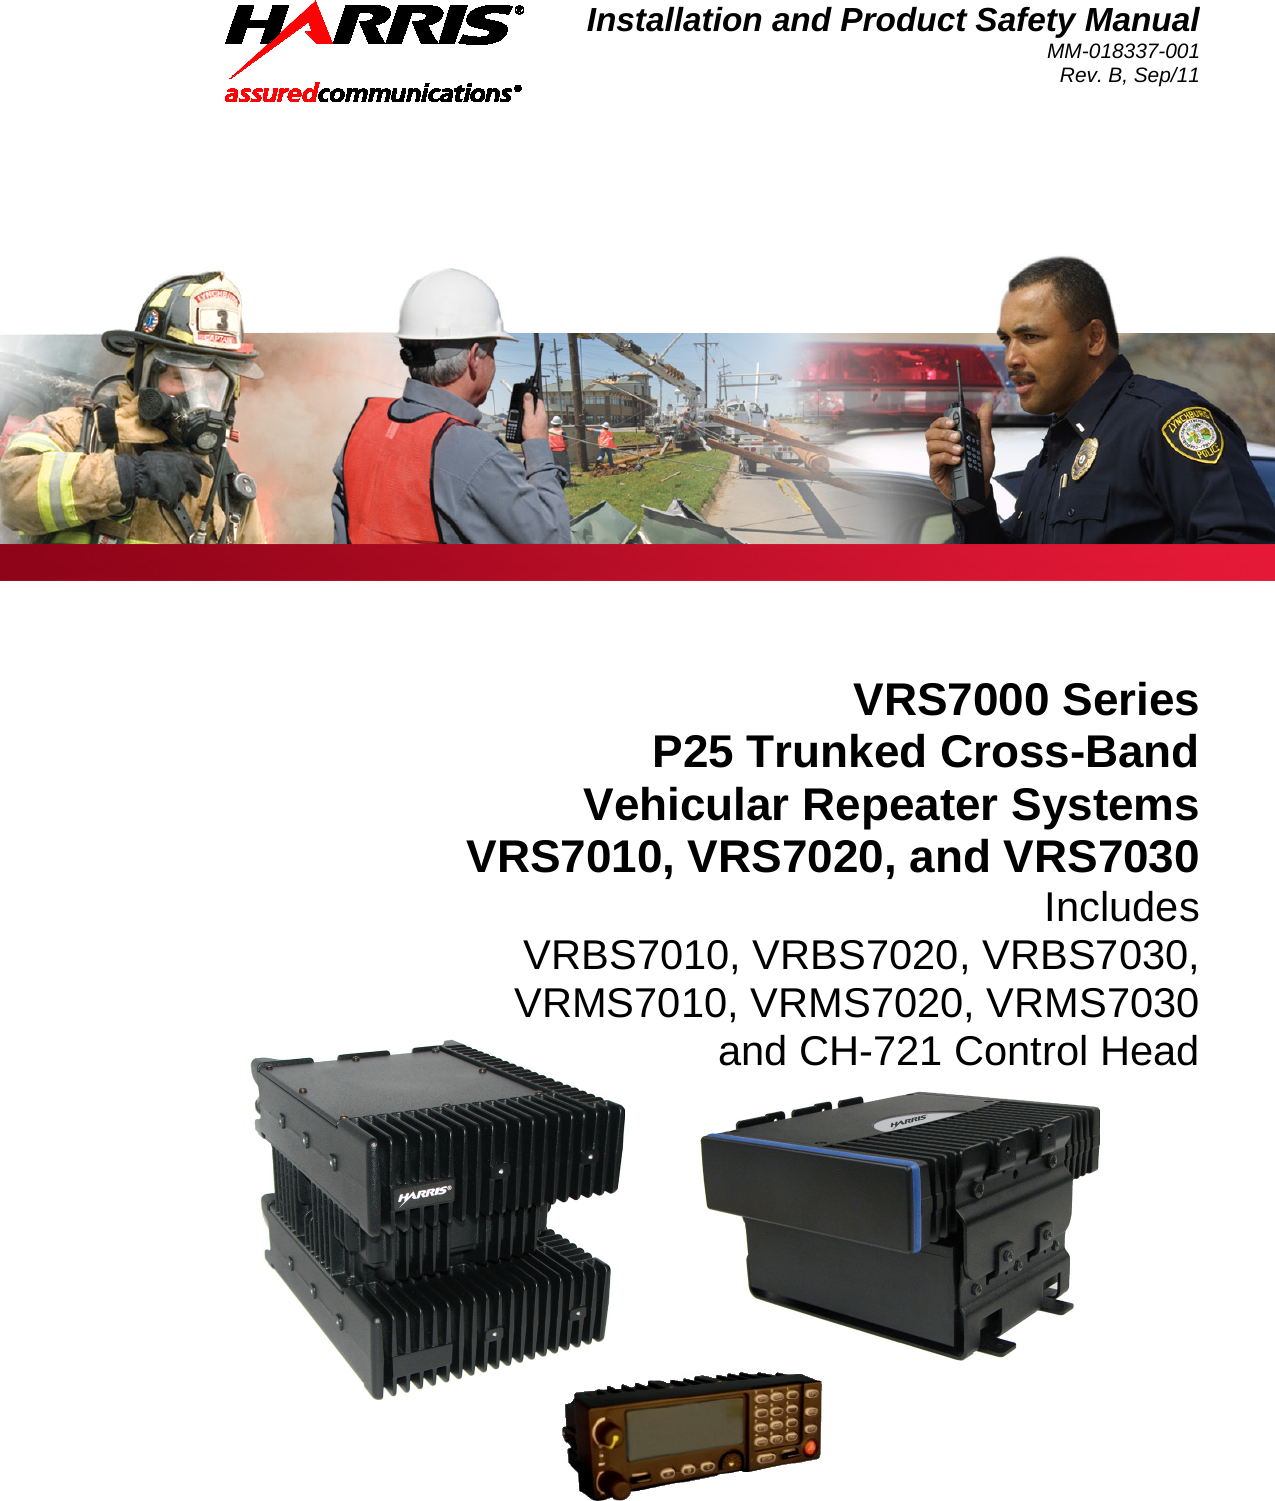 Installation and Product Safety Manual MM-018337-001 Rev. B, Sep/11   VRS7000 Series P25 Trunked Cross-Band Vehicular Repeater Systems VRS7010, VRS7020, and VRS7030 Includes VRBS7010, VRBS7020, VRBS7030, VRMS7010, VRMS7020, VRMS7030 and CH-721 Control Head 